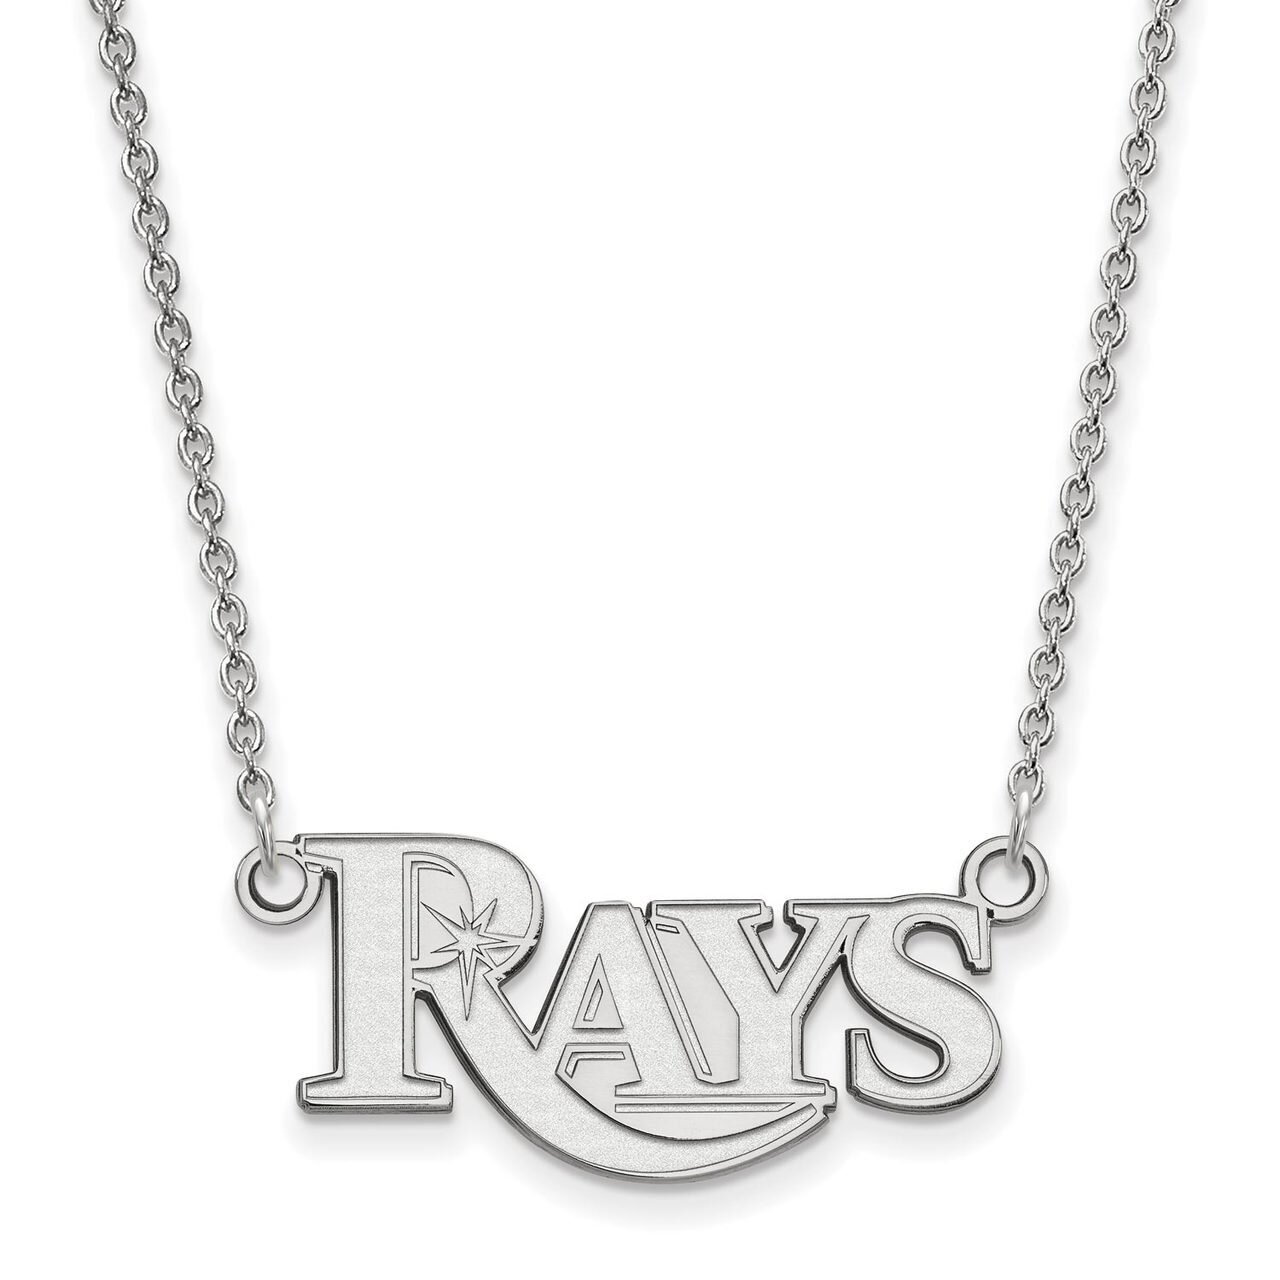 Tampa Bay Rays Small Pendant with Chain Necklace 10k White Gold 1W018DEV-18